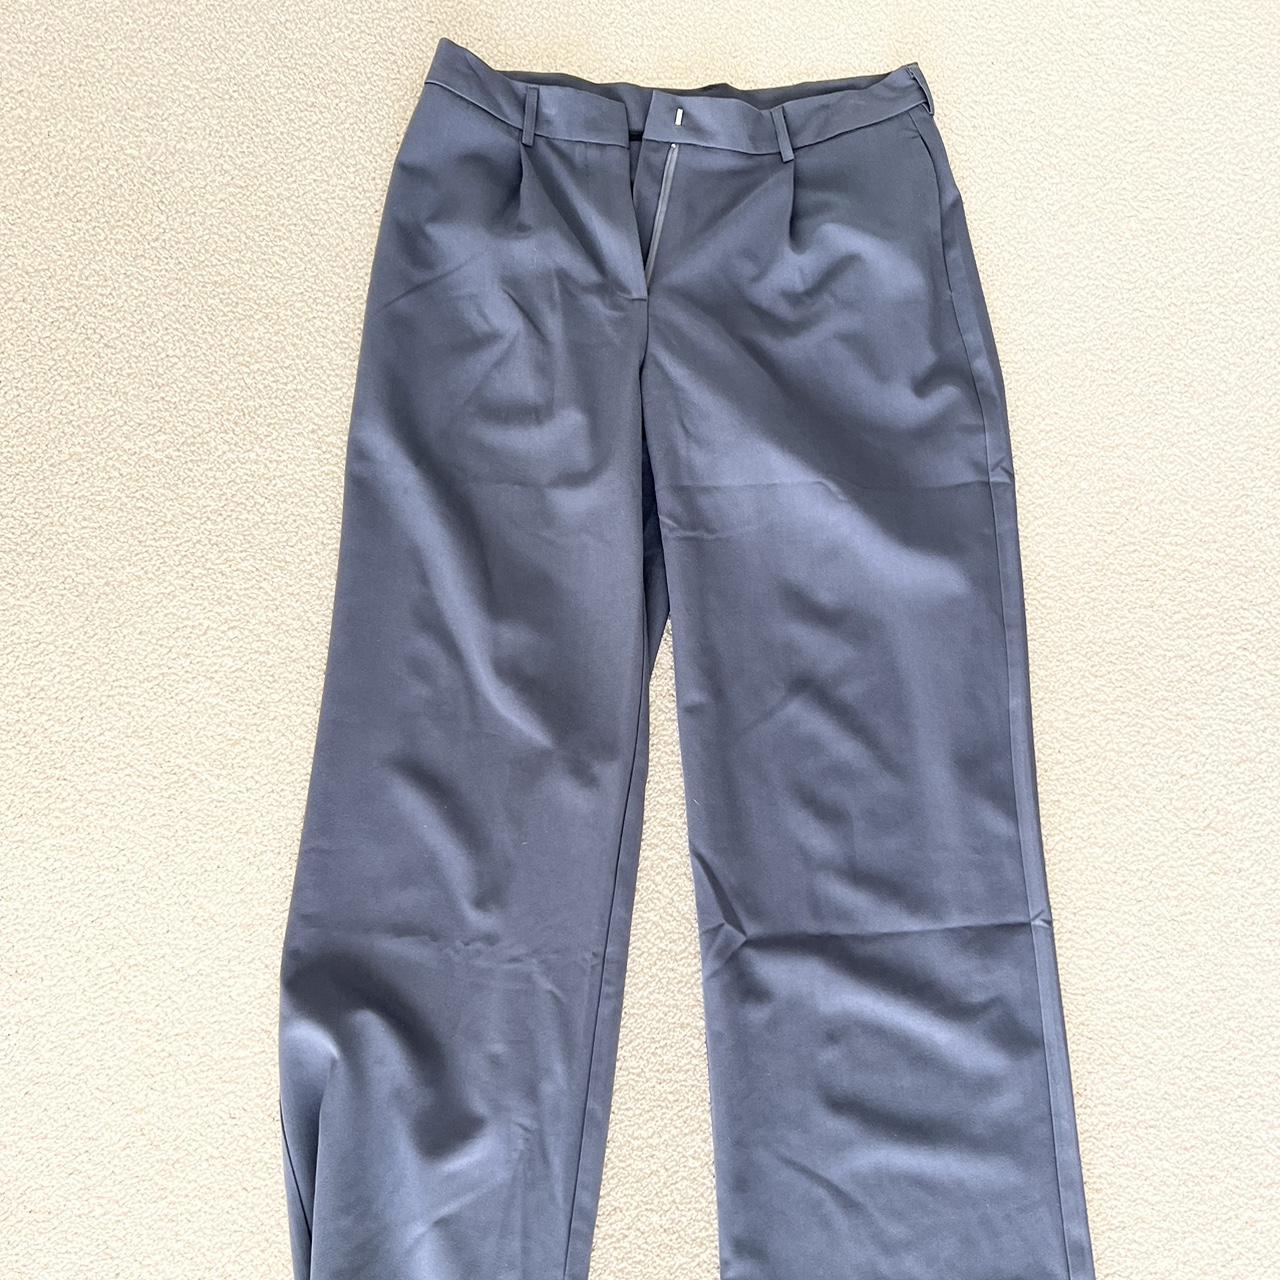 Charcoal grey work pants * Please note they are a... - Depop